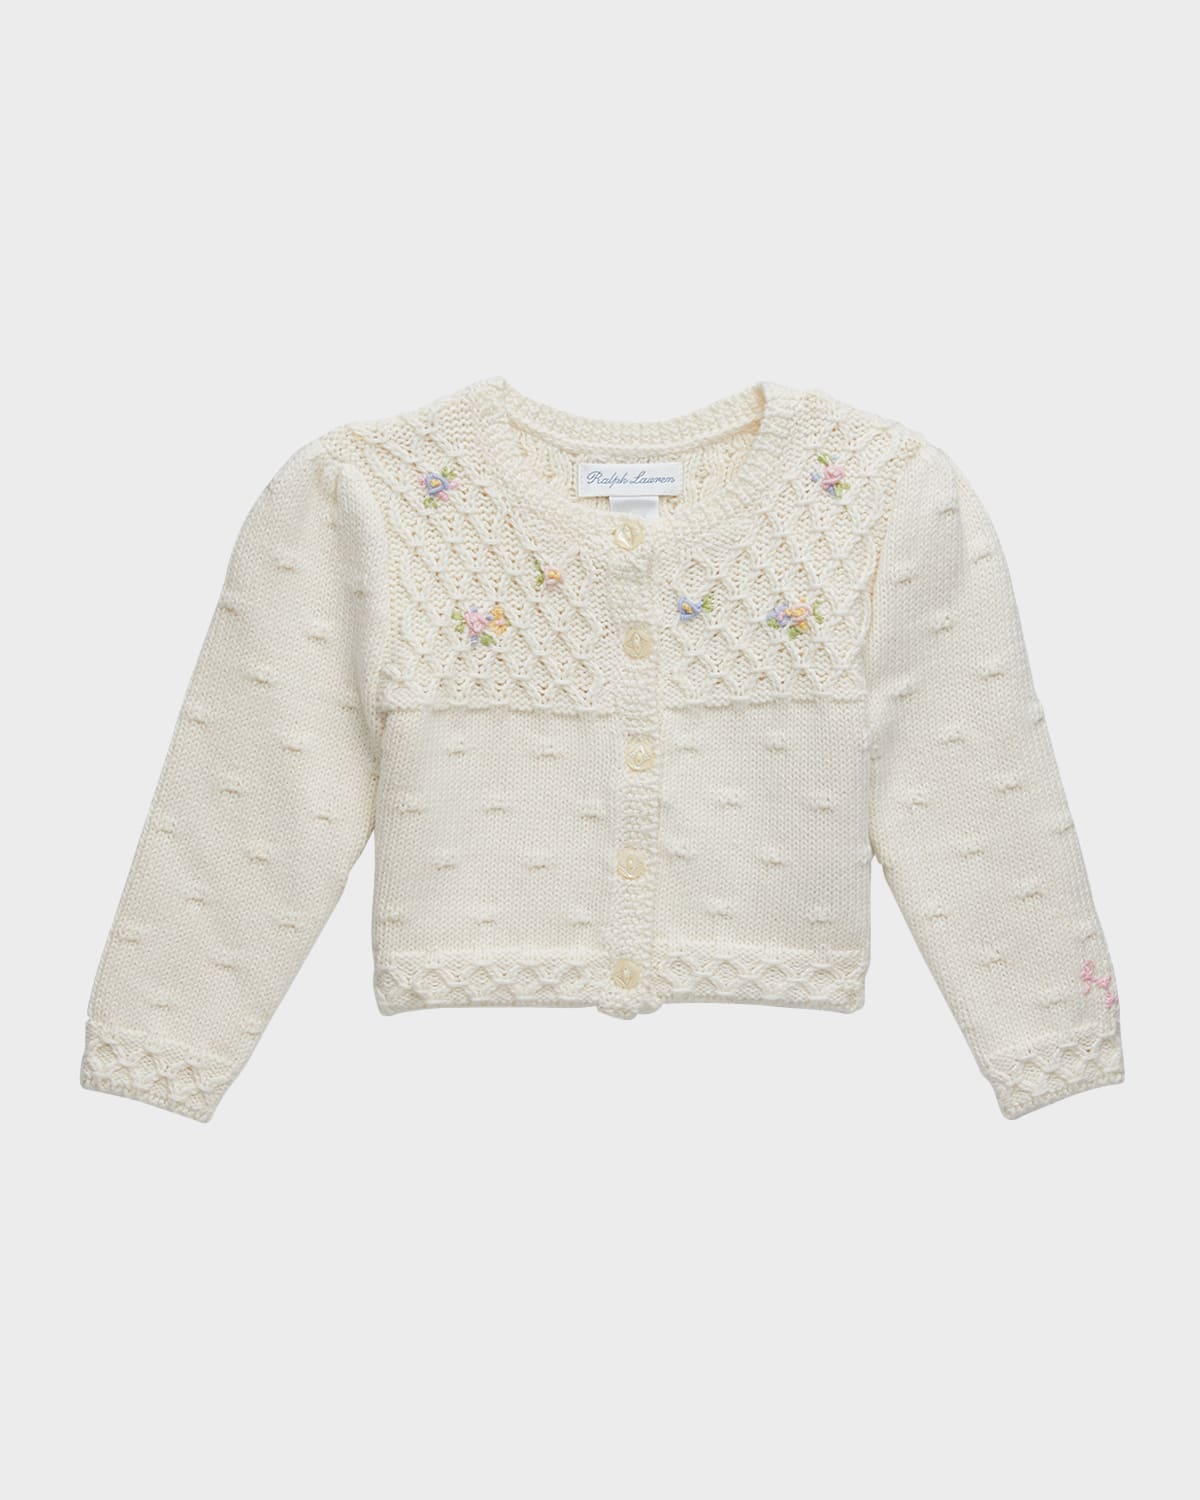 RALPH LAUREN GIRL'S EMBROIDERED FLOWERS KNIT CARDIGAN